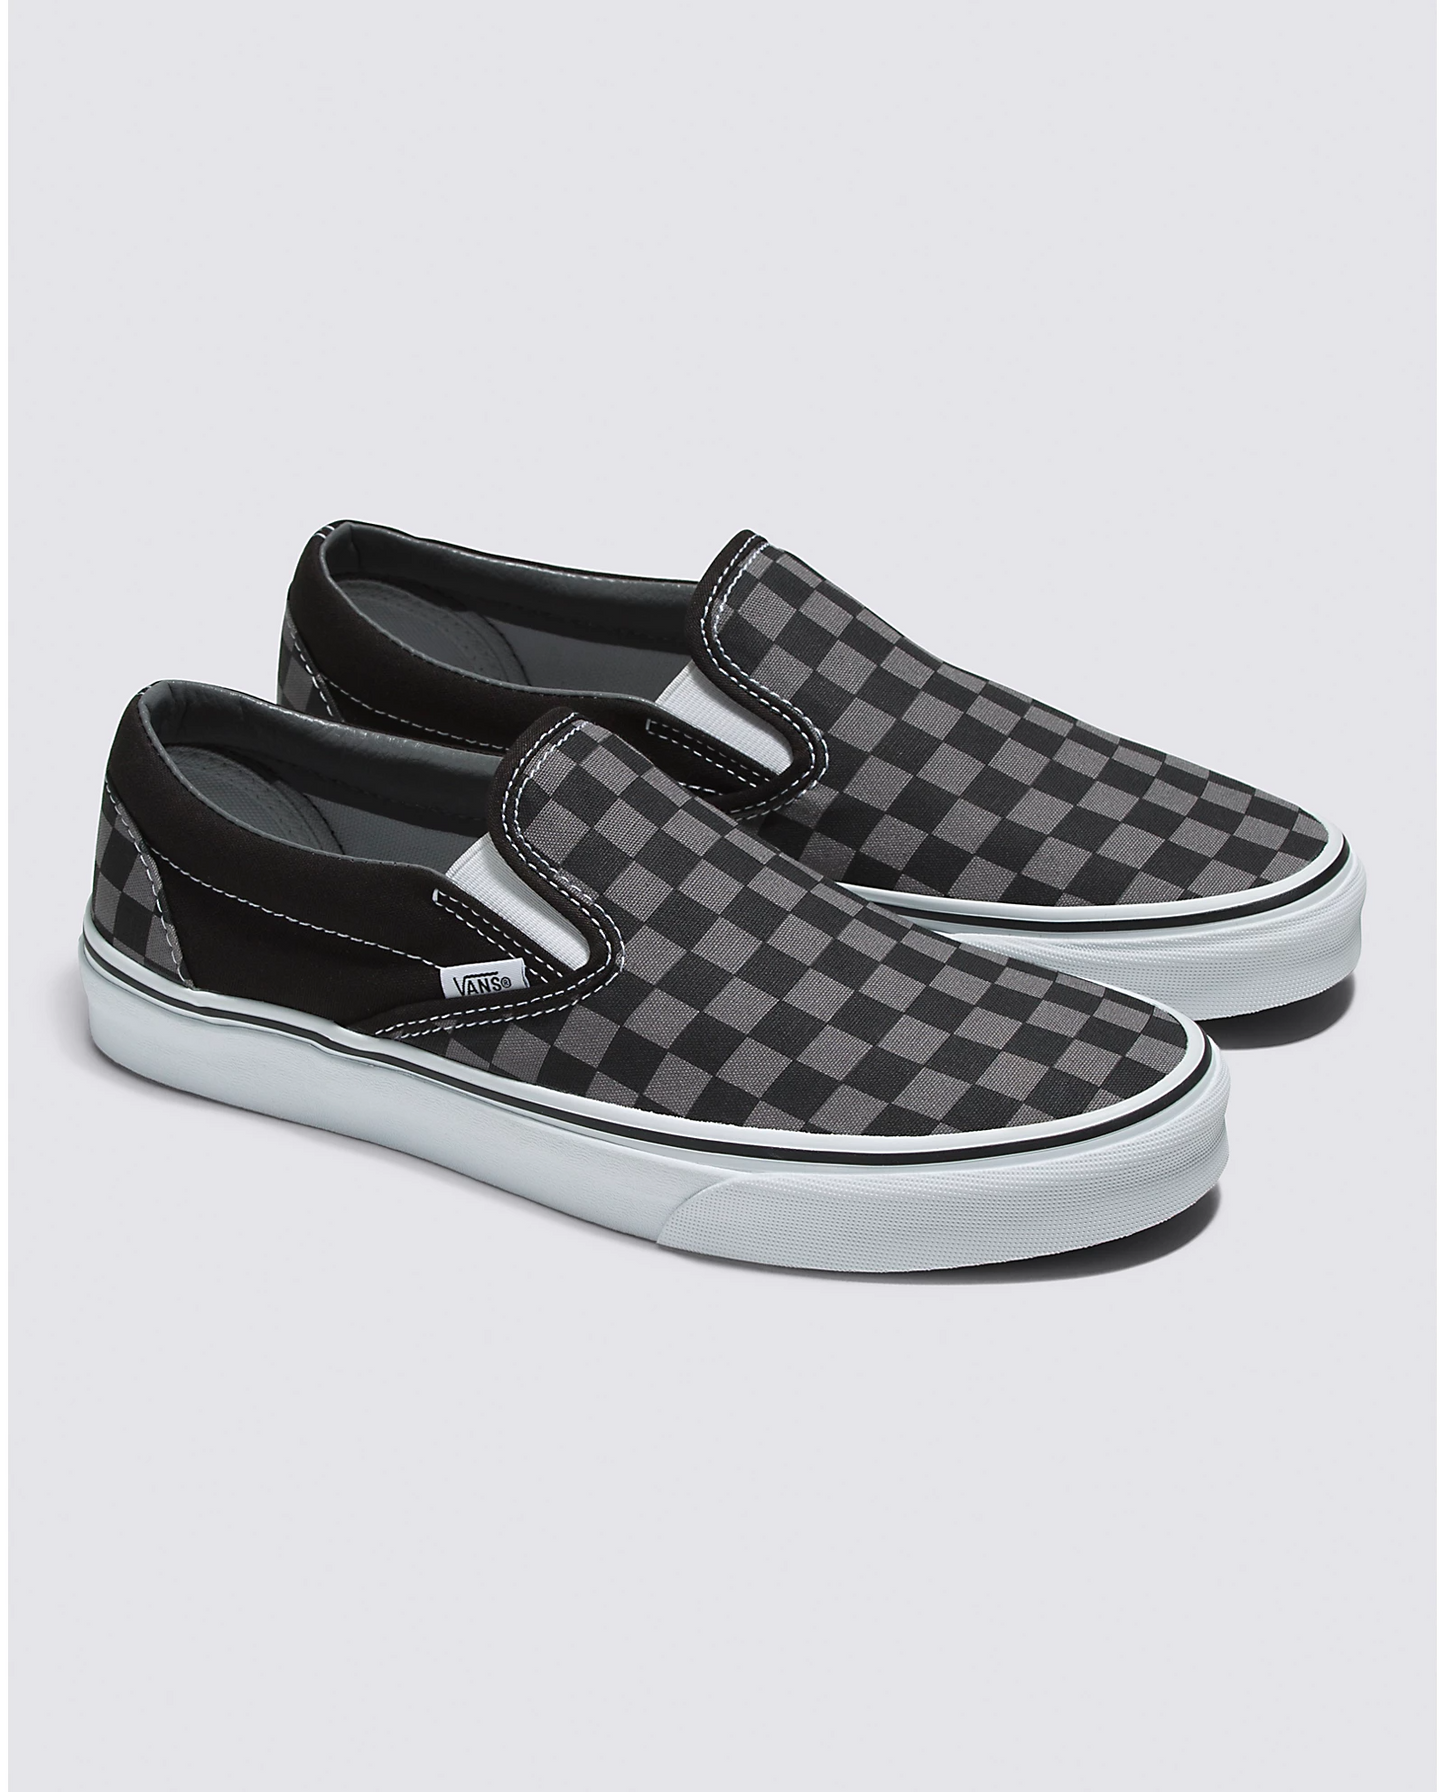 Classic Checkerboard Slip-On Shoes